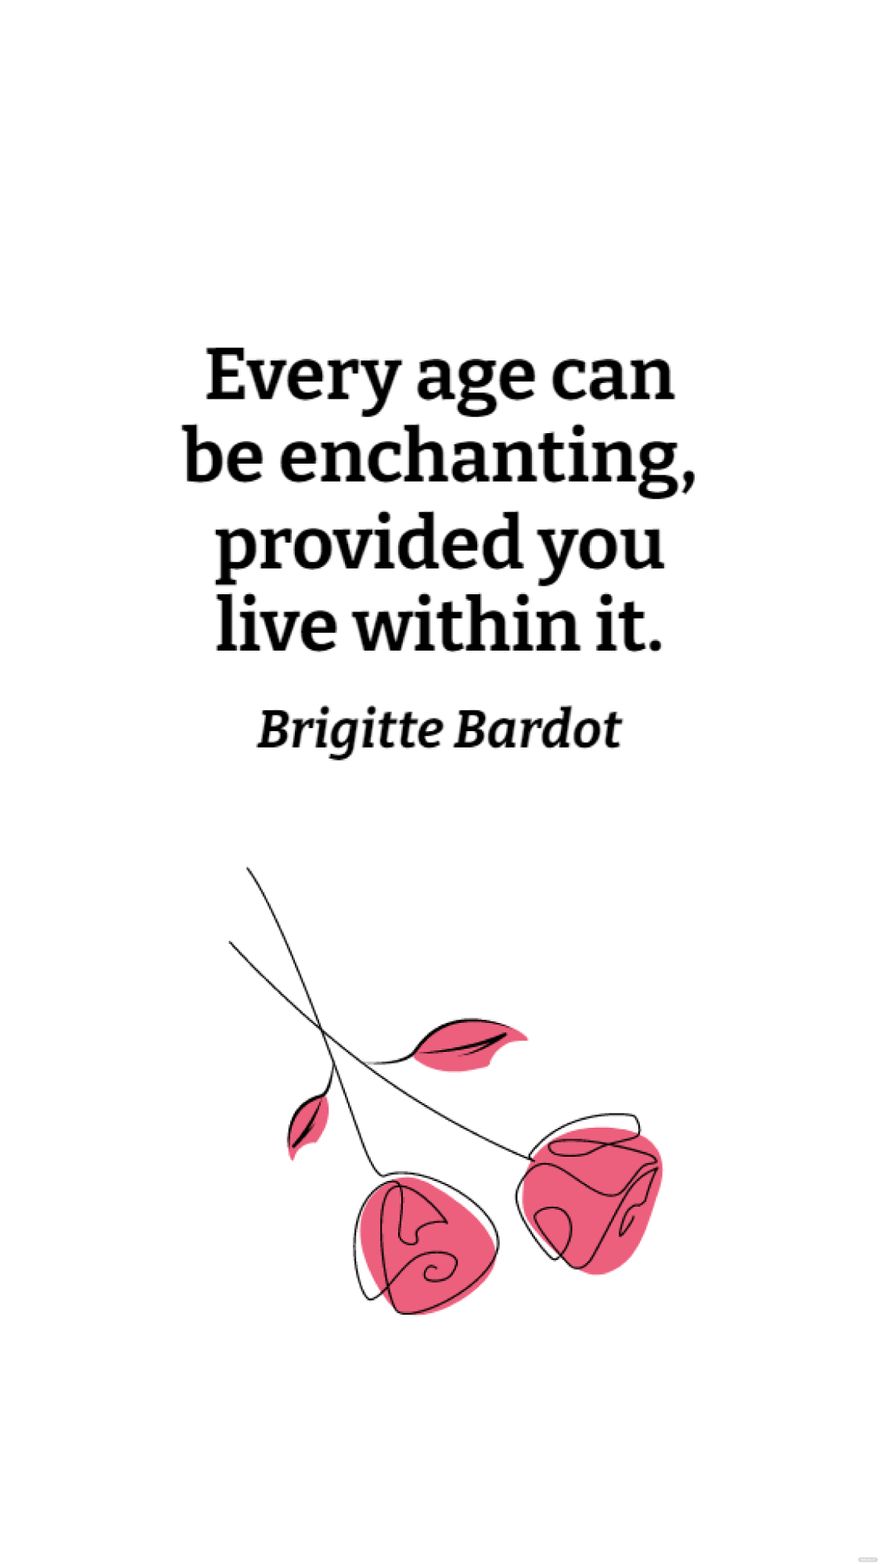 Free Brigitte Bardot - Every age can be enchanting, provided you live within it. in JPG